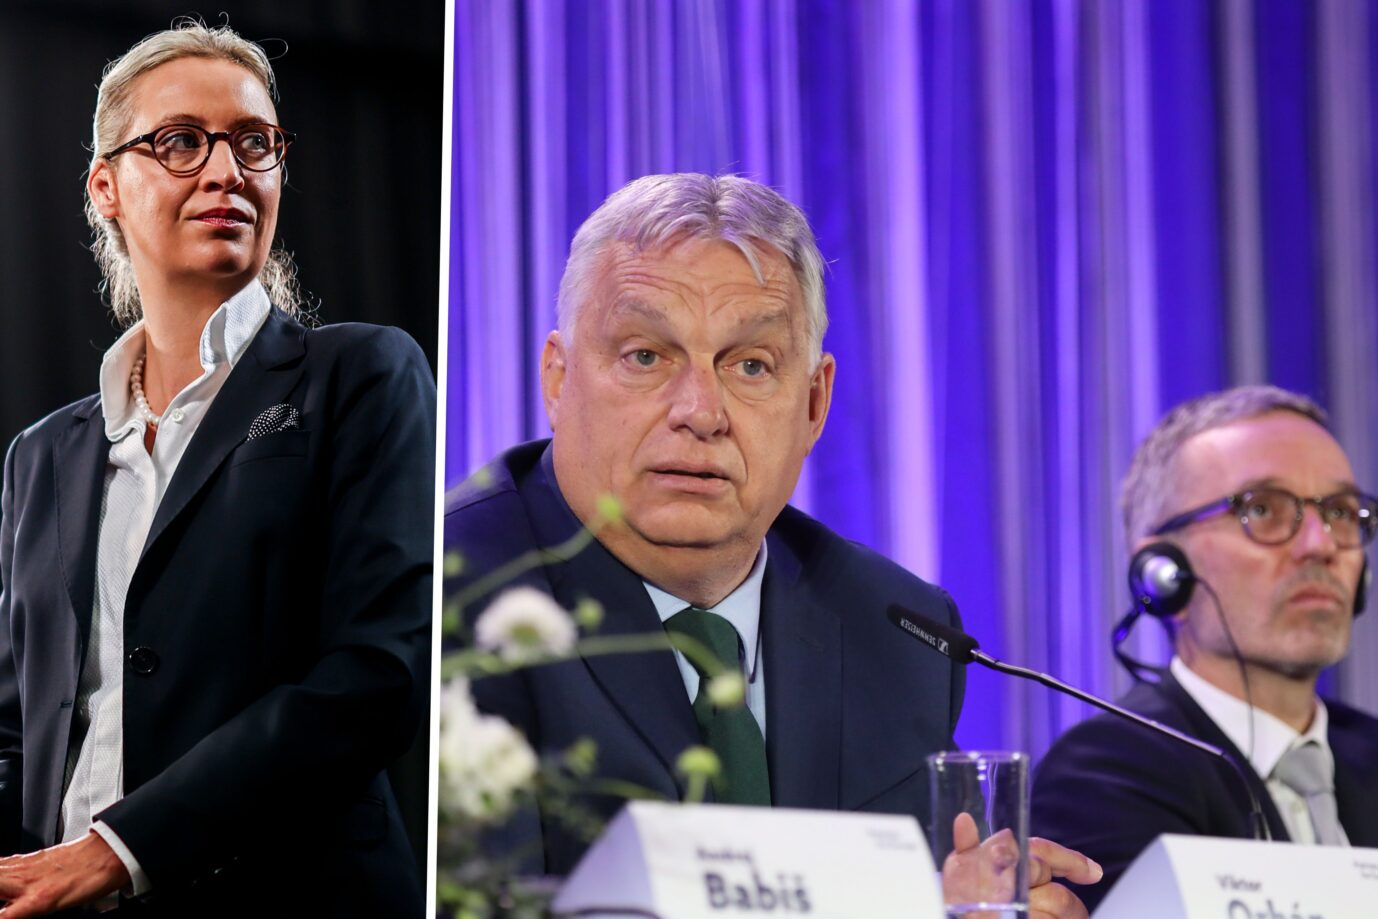 AfD is not in a joint EU parliamentary group with Orbán and FPÖ